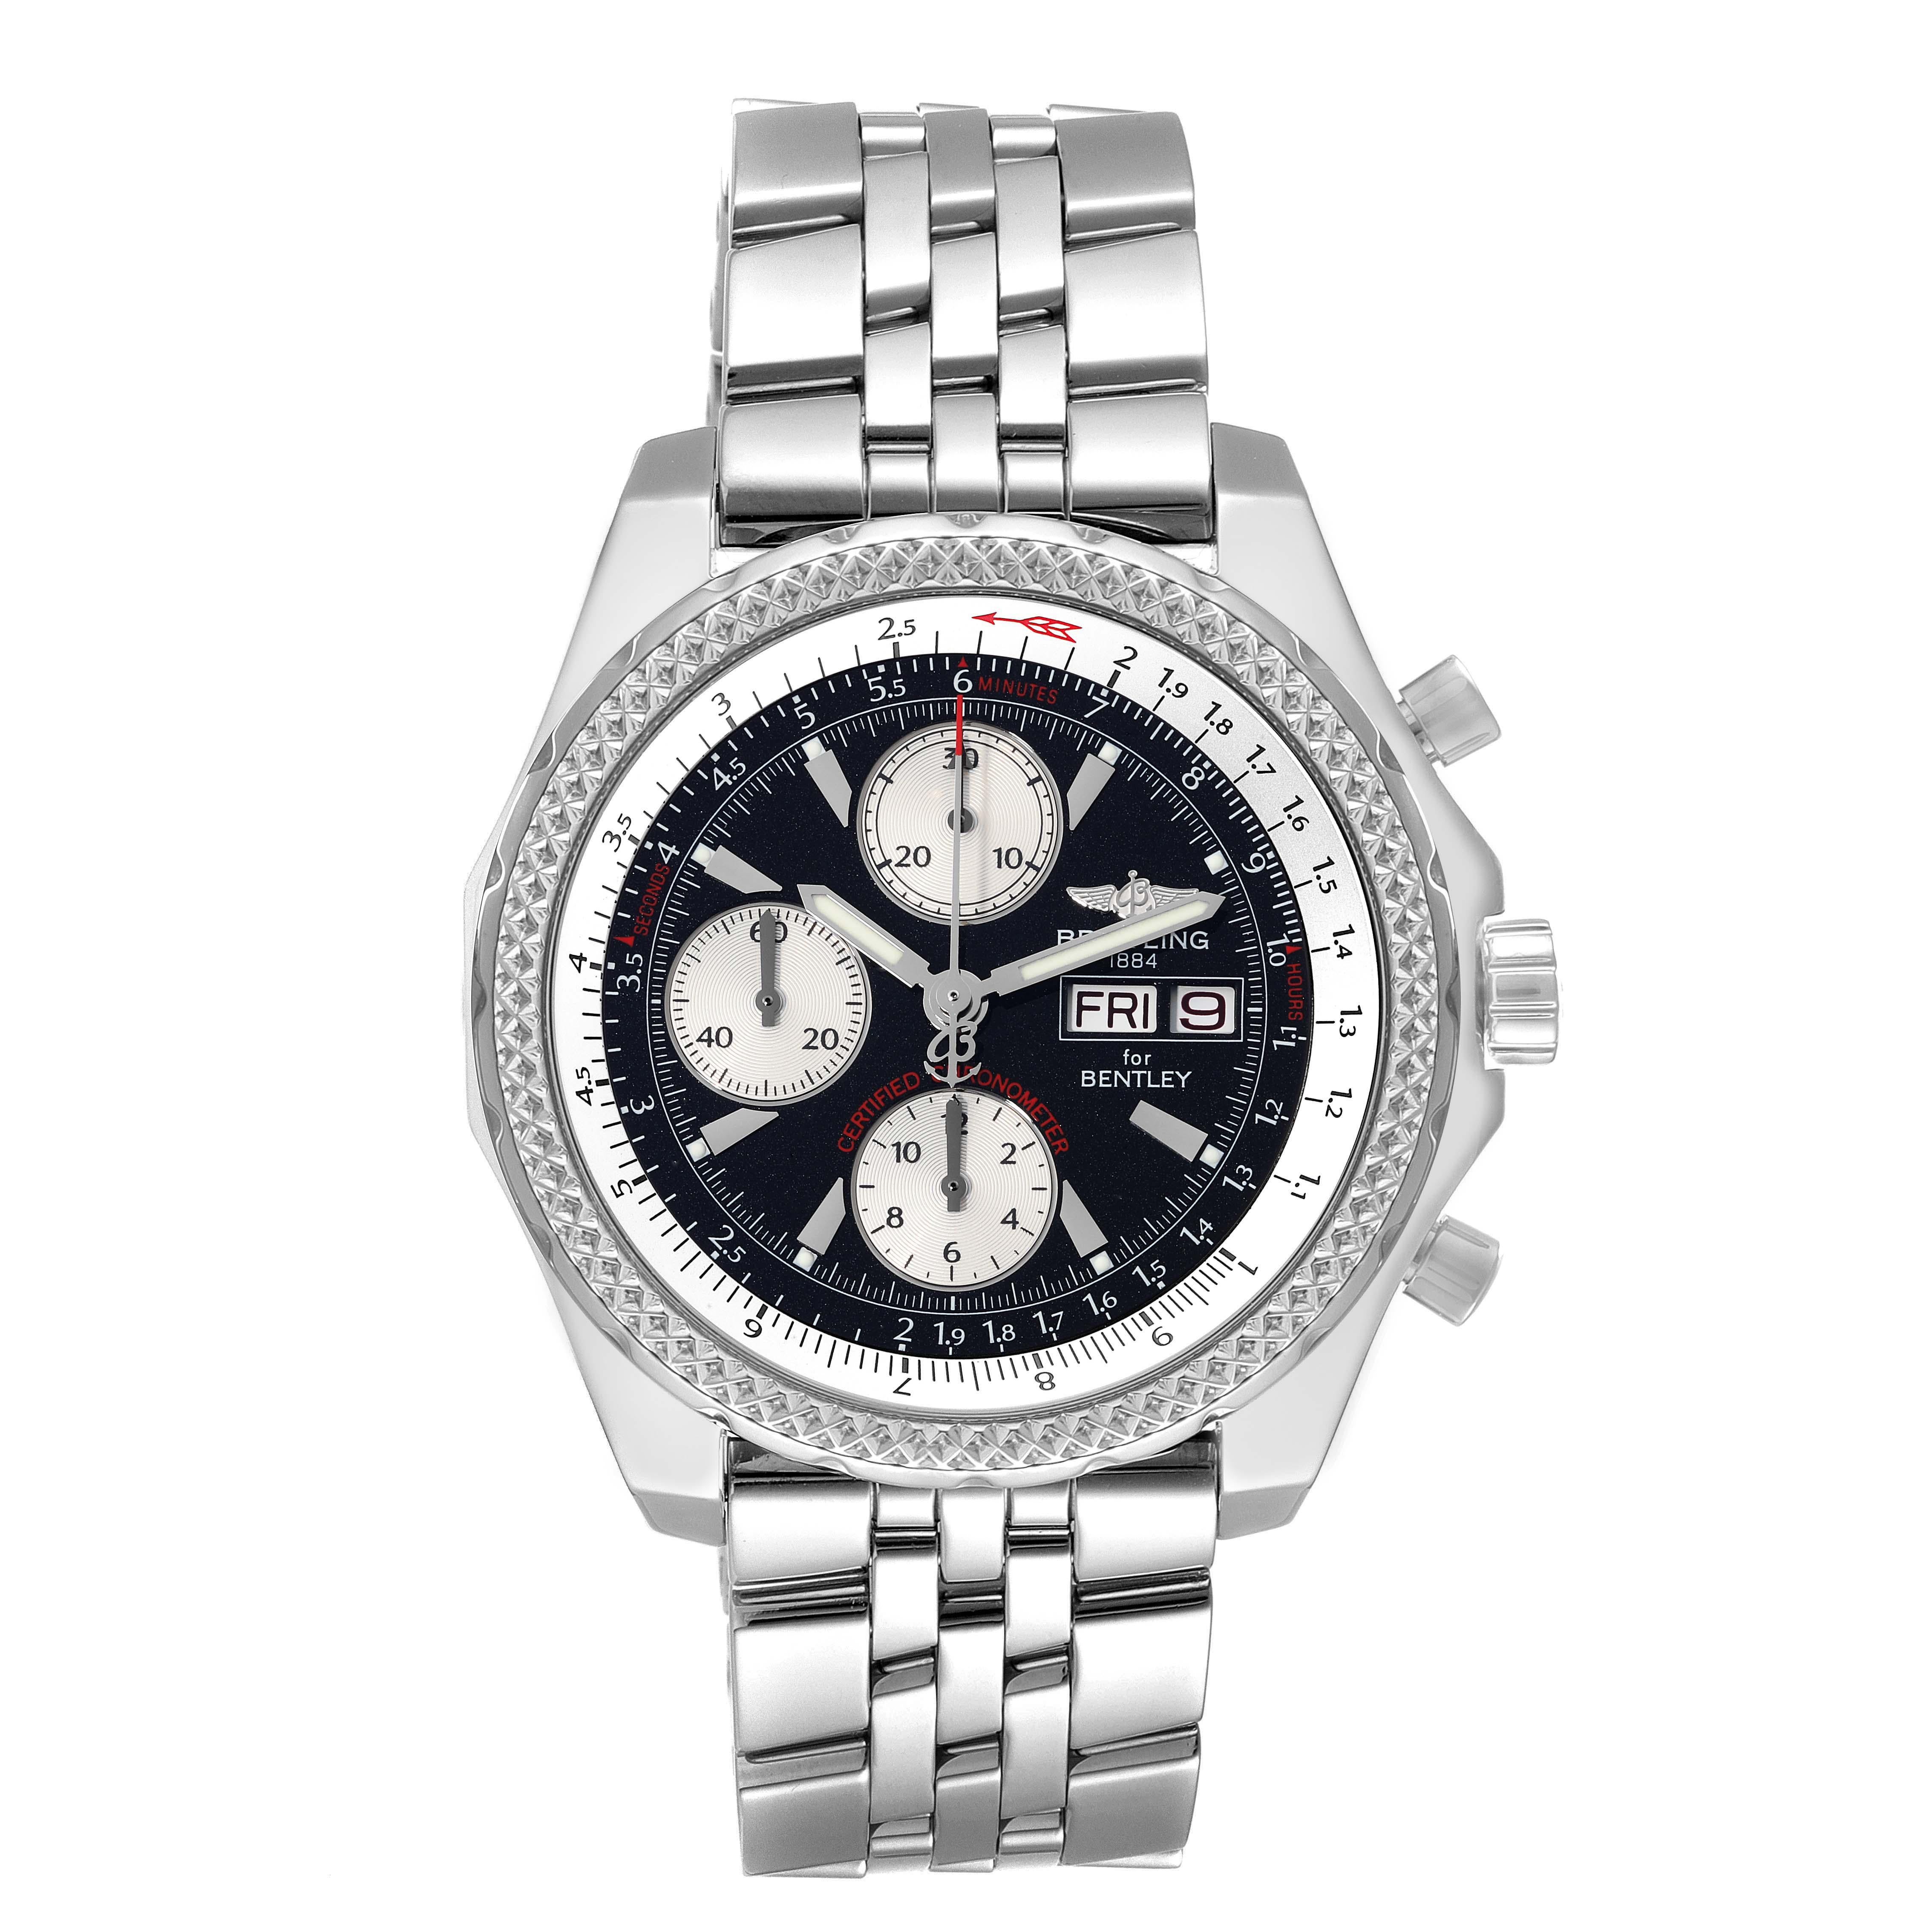 Breitling Bentley Motors GT Black Dial Steel Mens Watch A13362. Self-winding automatic officially certified chronometer movement. Chronograph function. Stainless steel case 44.8 mm in diameter. Stainless steel screwed-down crown. Screw down